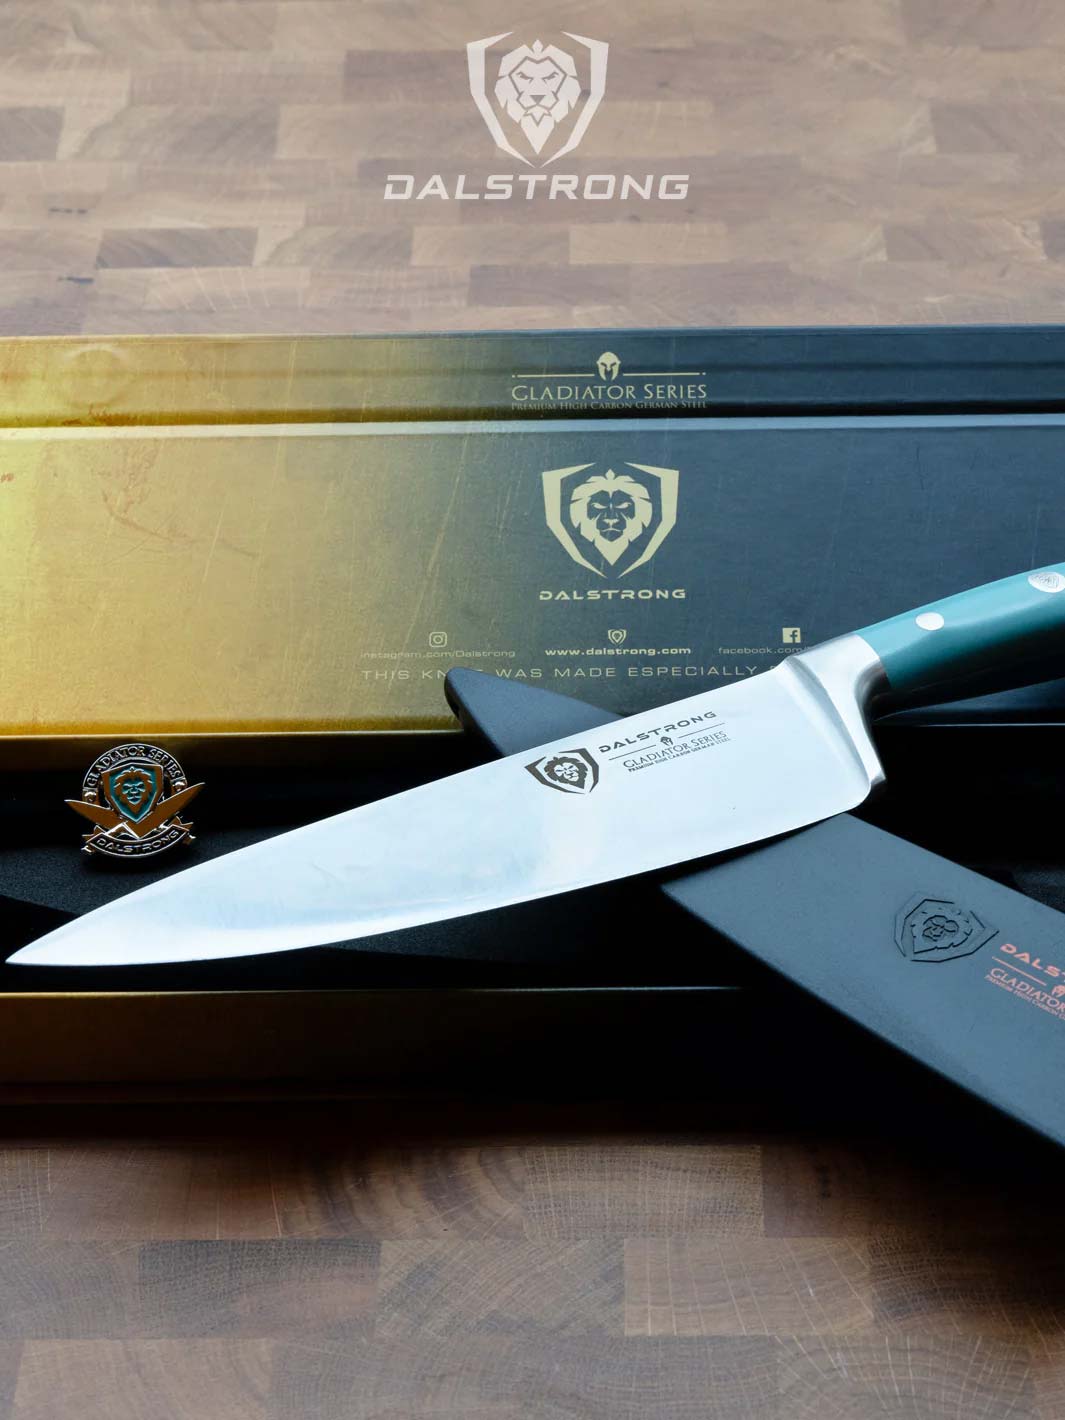 Dalstrong gladiator series 8 inch chef knife with aegean teal handle and black sheath on top of it's premium packaging.